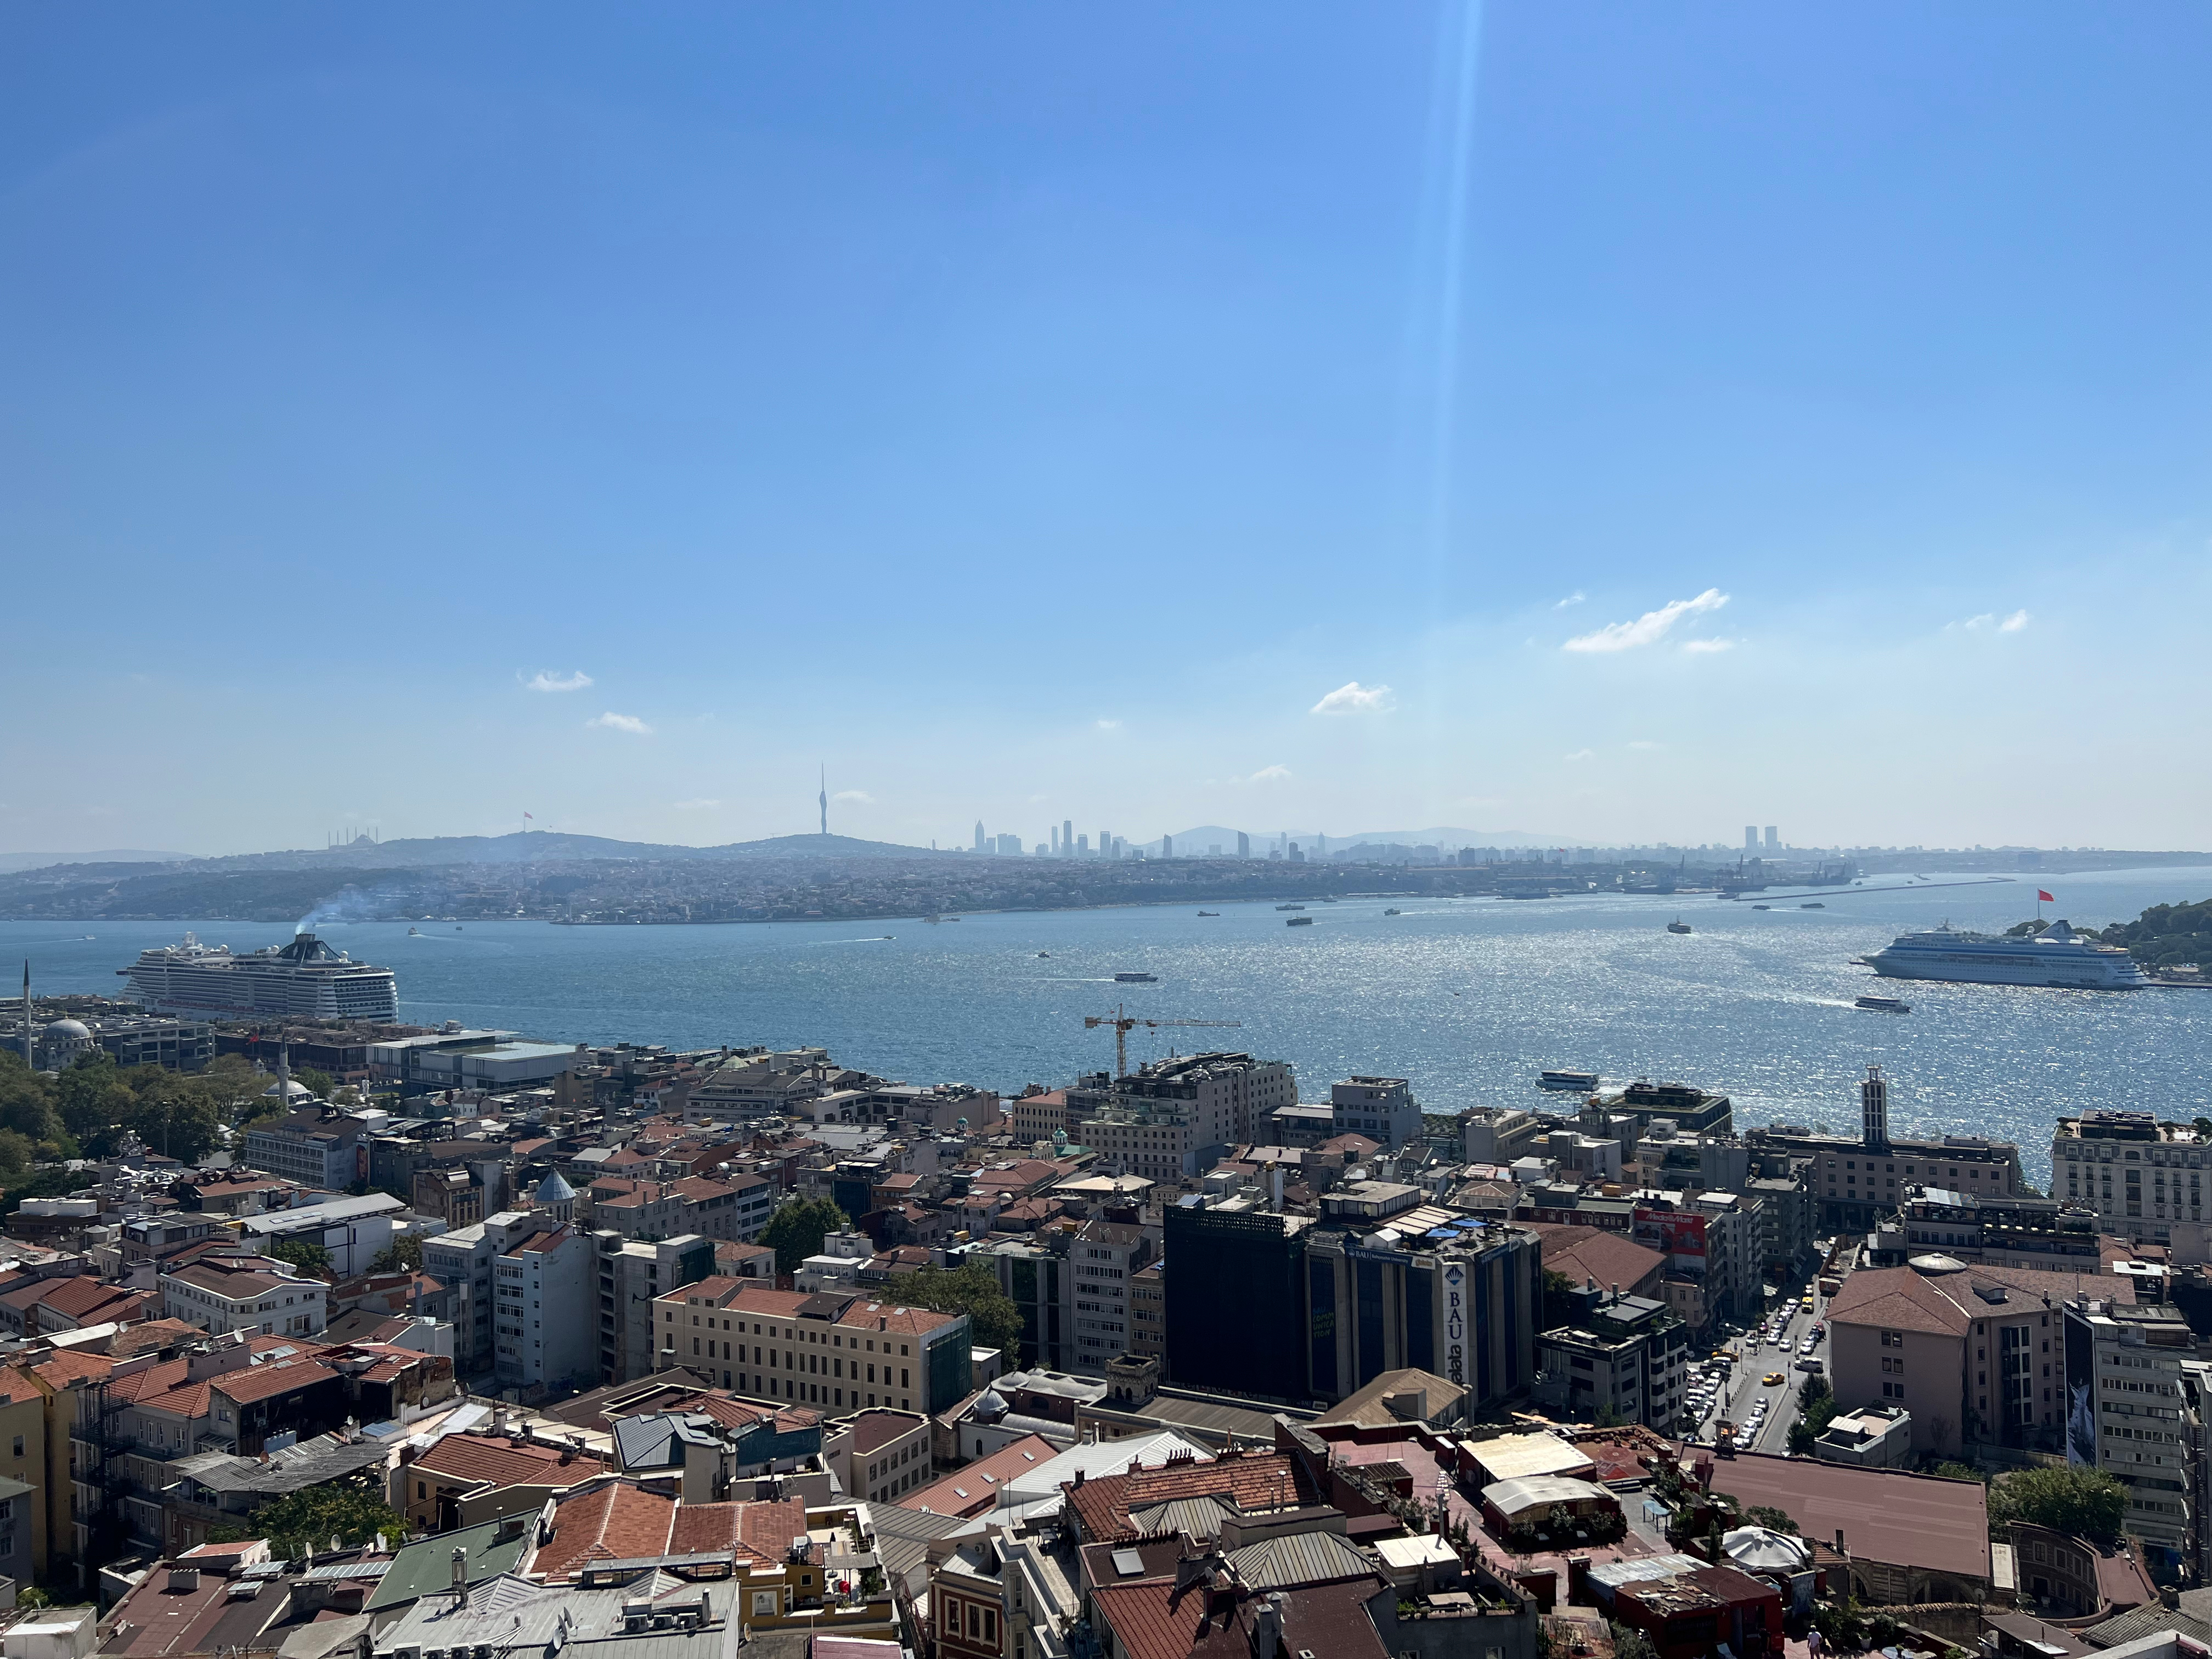 View of the Bosphorus from the Galata Tower